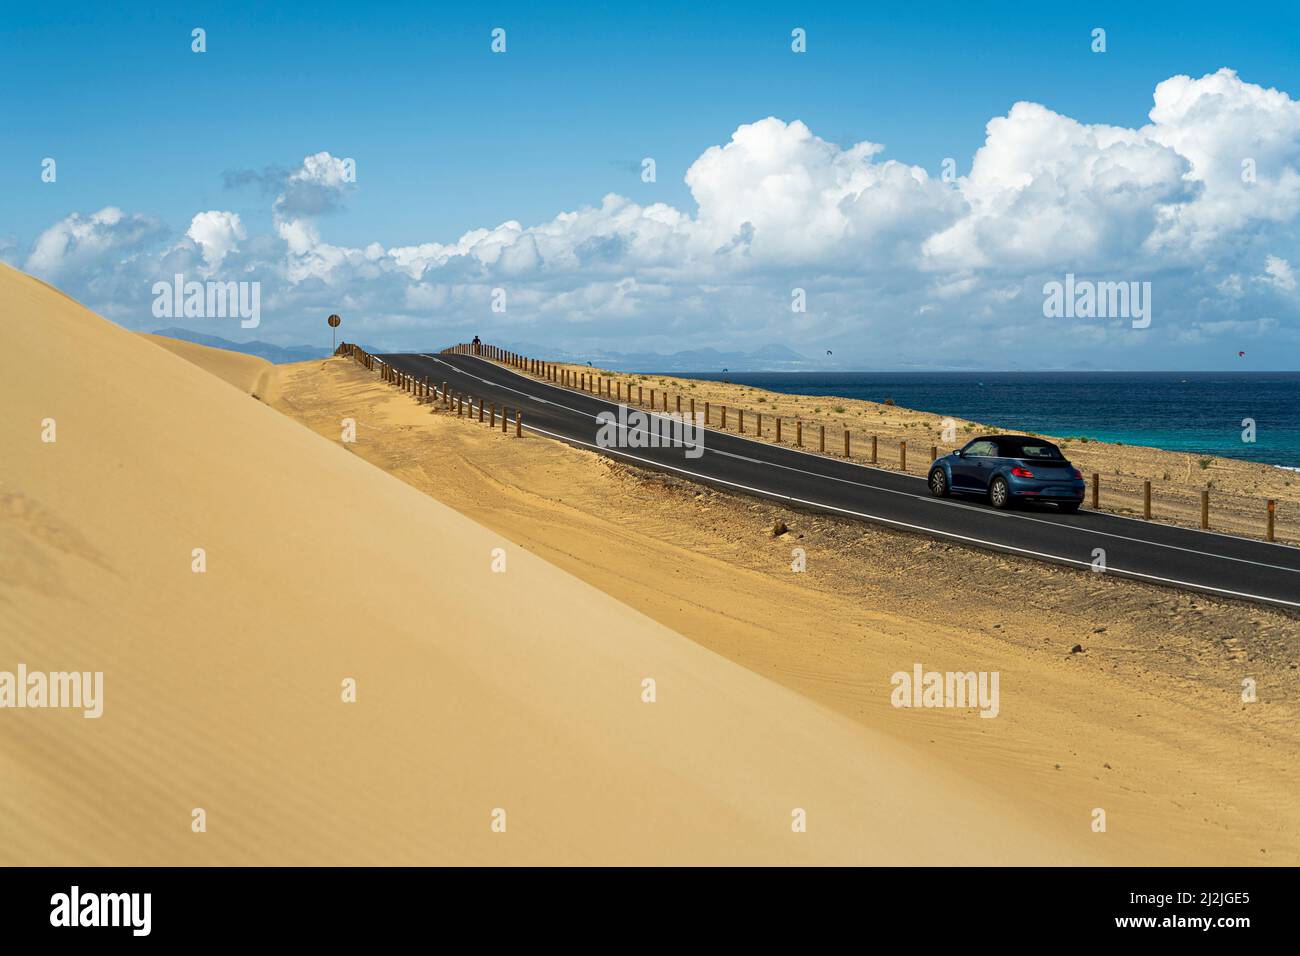 Car traveling on road in between sand dunes and ocean, Corralejo Natural Park, Fuerteventura, Canary Islands, Spain Stock Photo